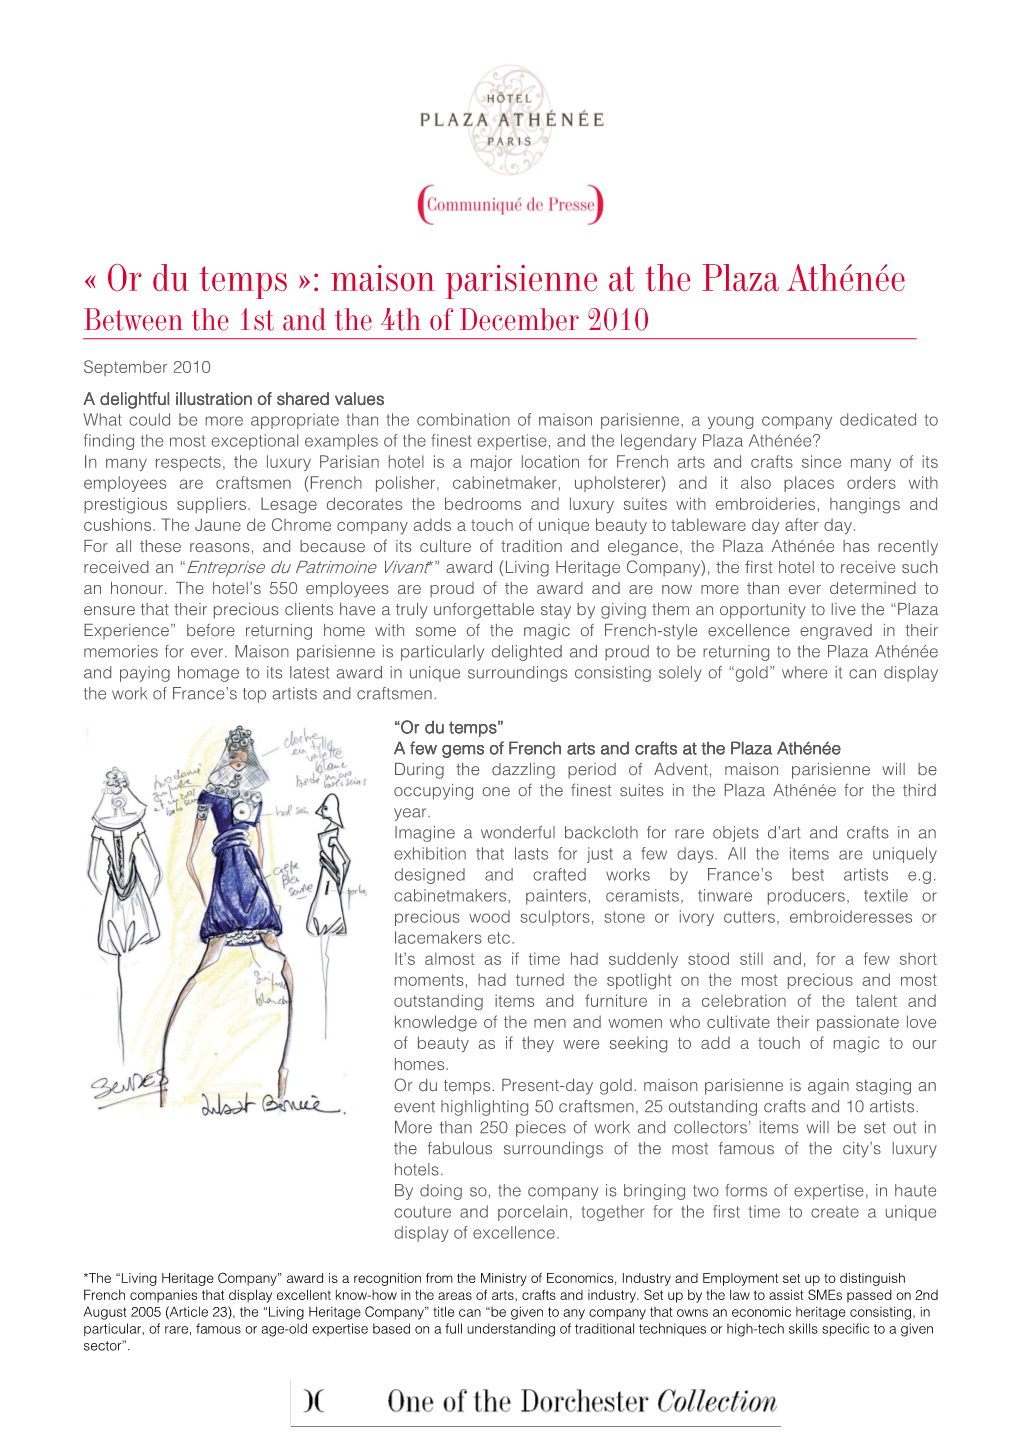 Or Du Temps »: Maison Parisienne at the Plaza Athénée Between the 1St and the 4Th of December 2010